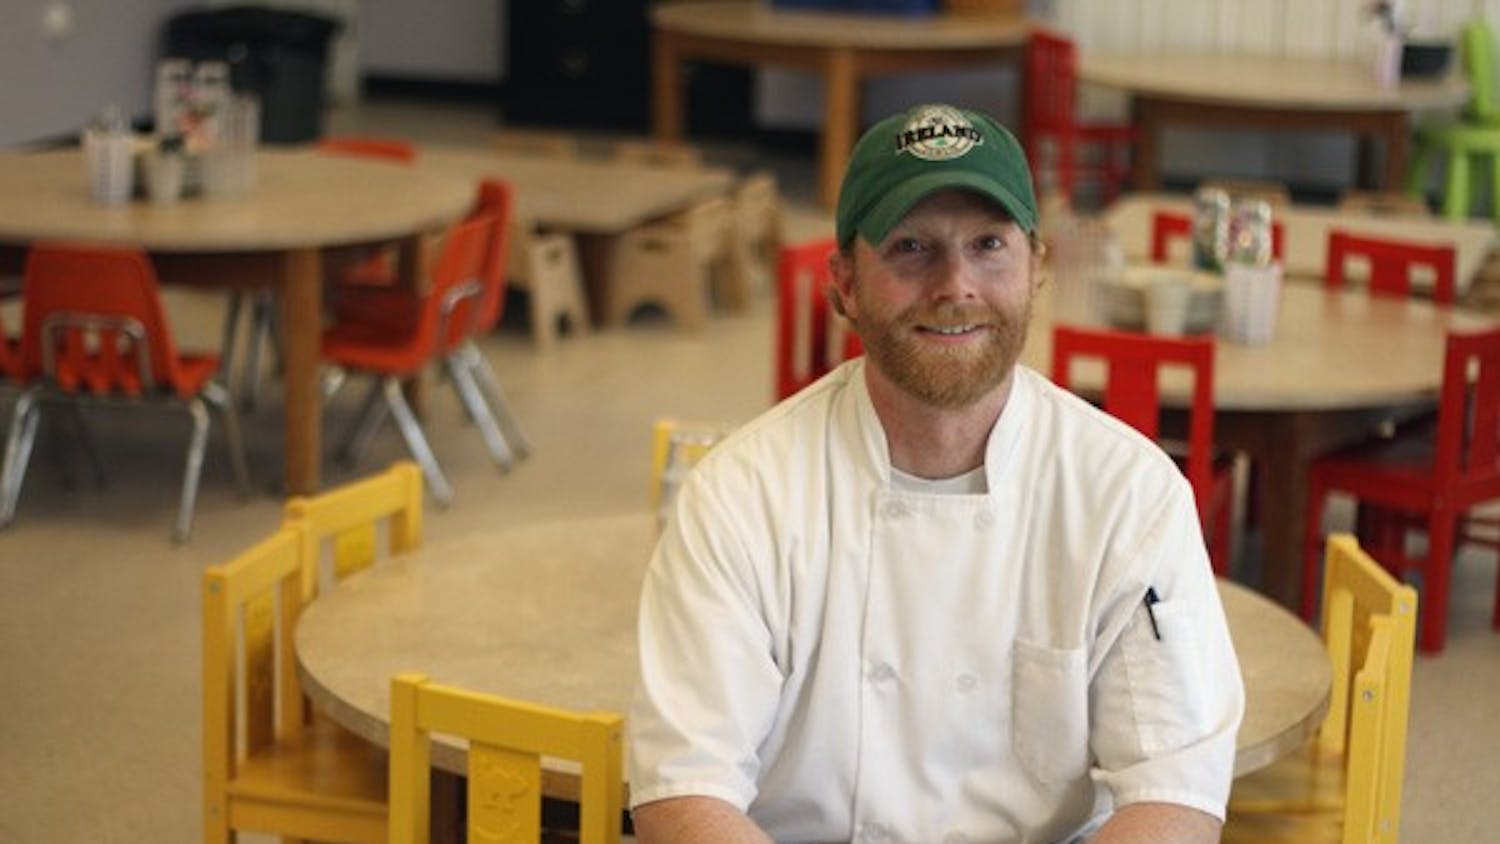 Nate McMullen, or “Chef Nate,” is the newest addition to the cafeteria at The Little School of Hillsborough. DTH/ Ali Cengiz